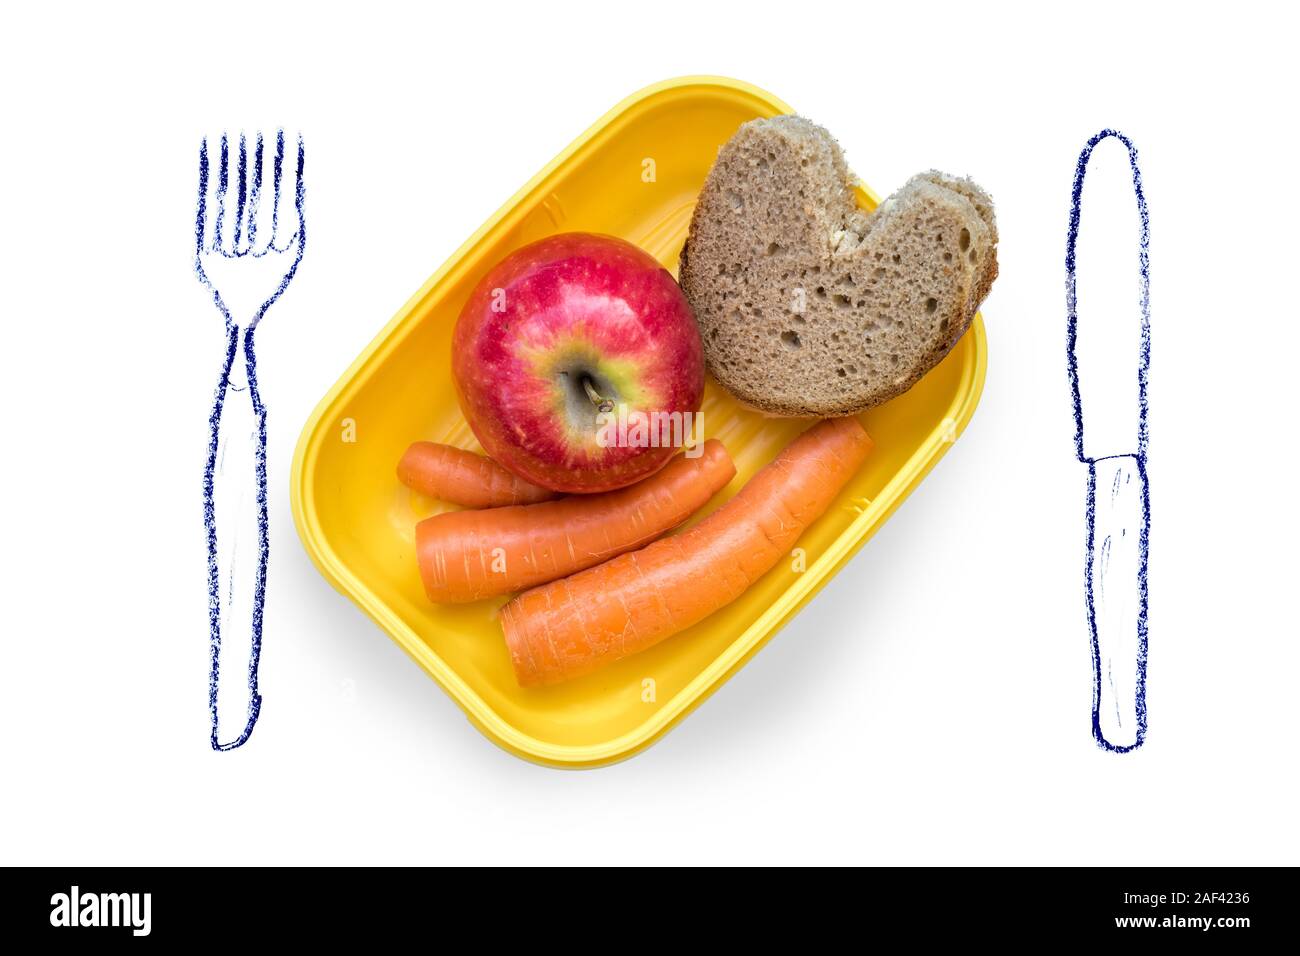 Lovingly prepared lunchbox with break bread, apple and carrots on white background with painted cutlery Stock Photo